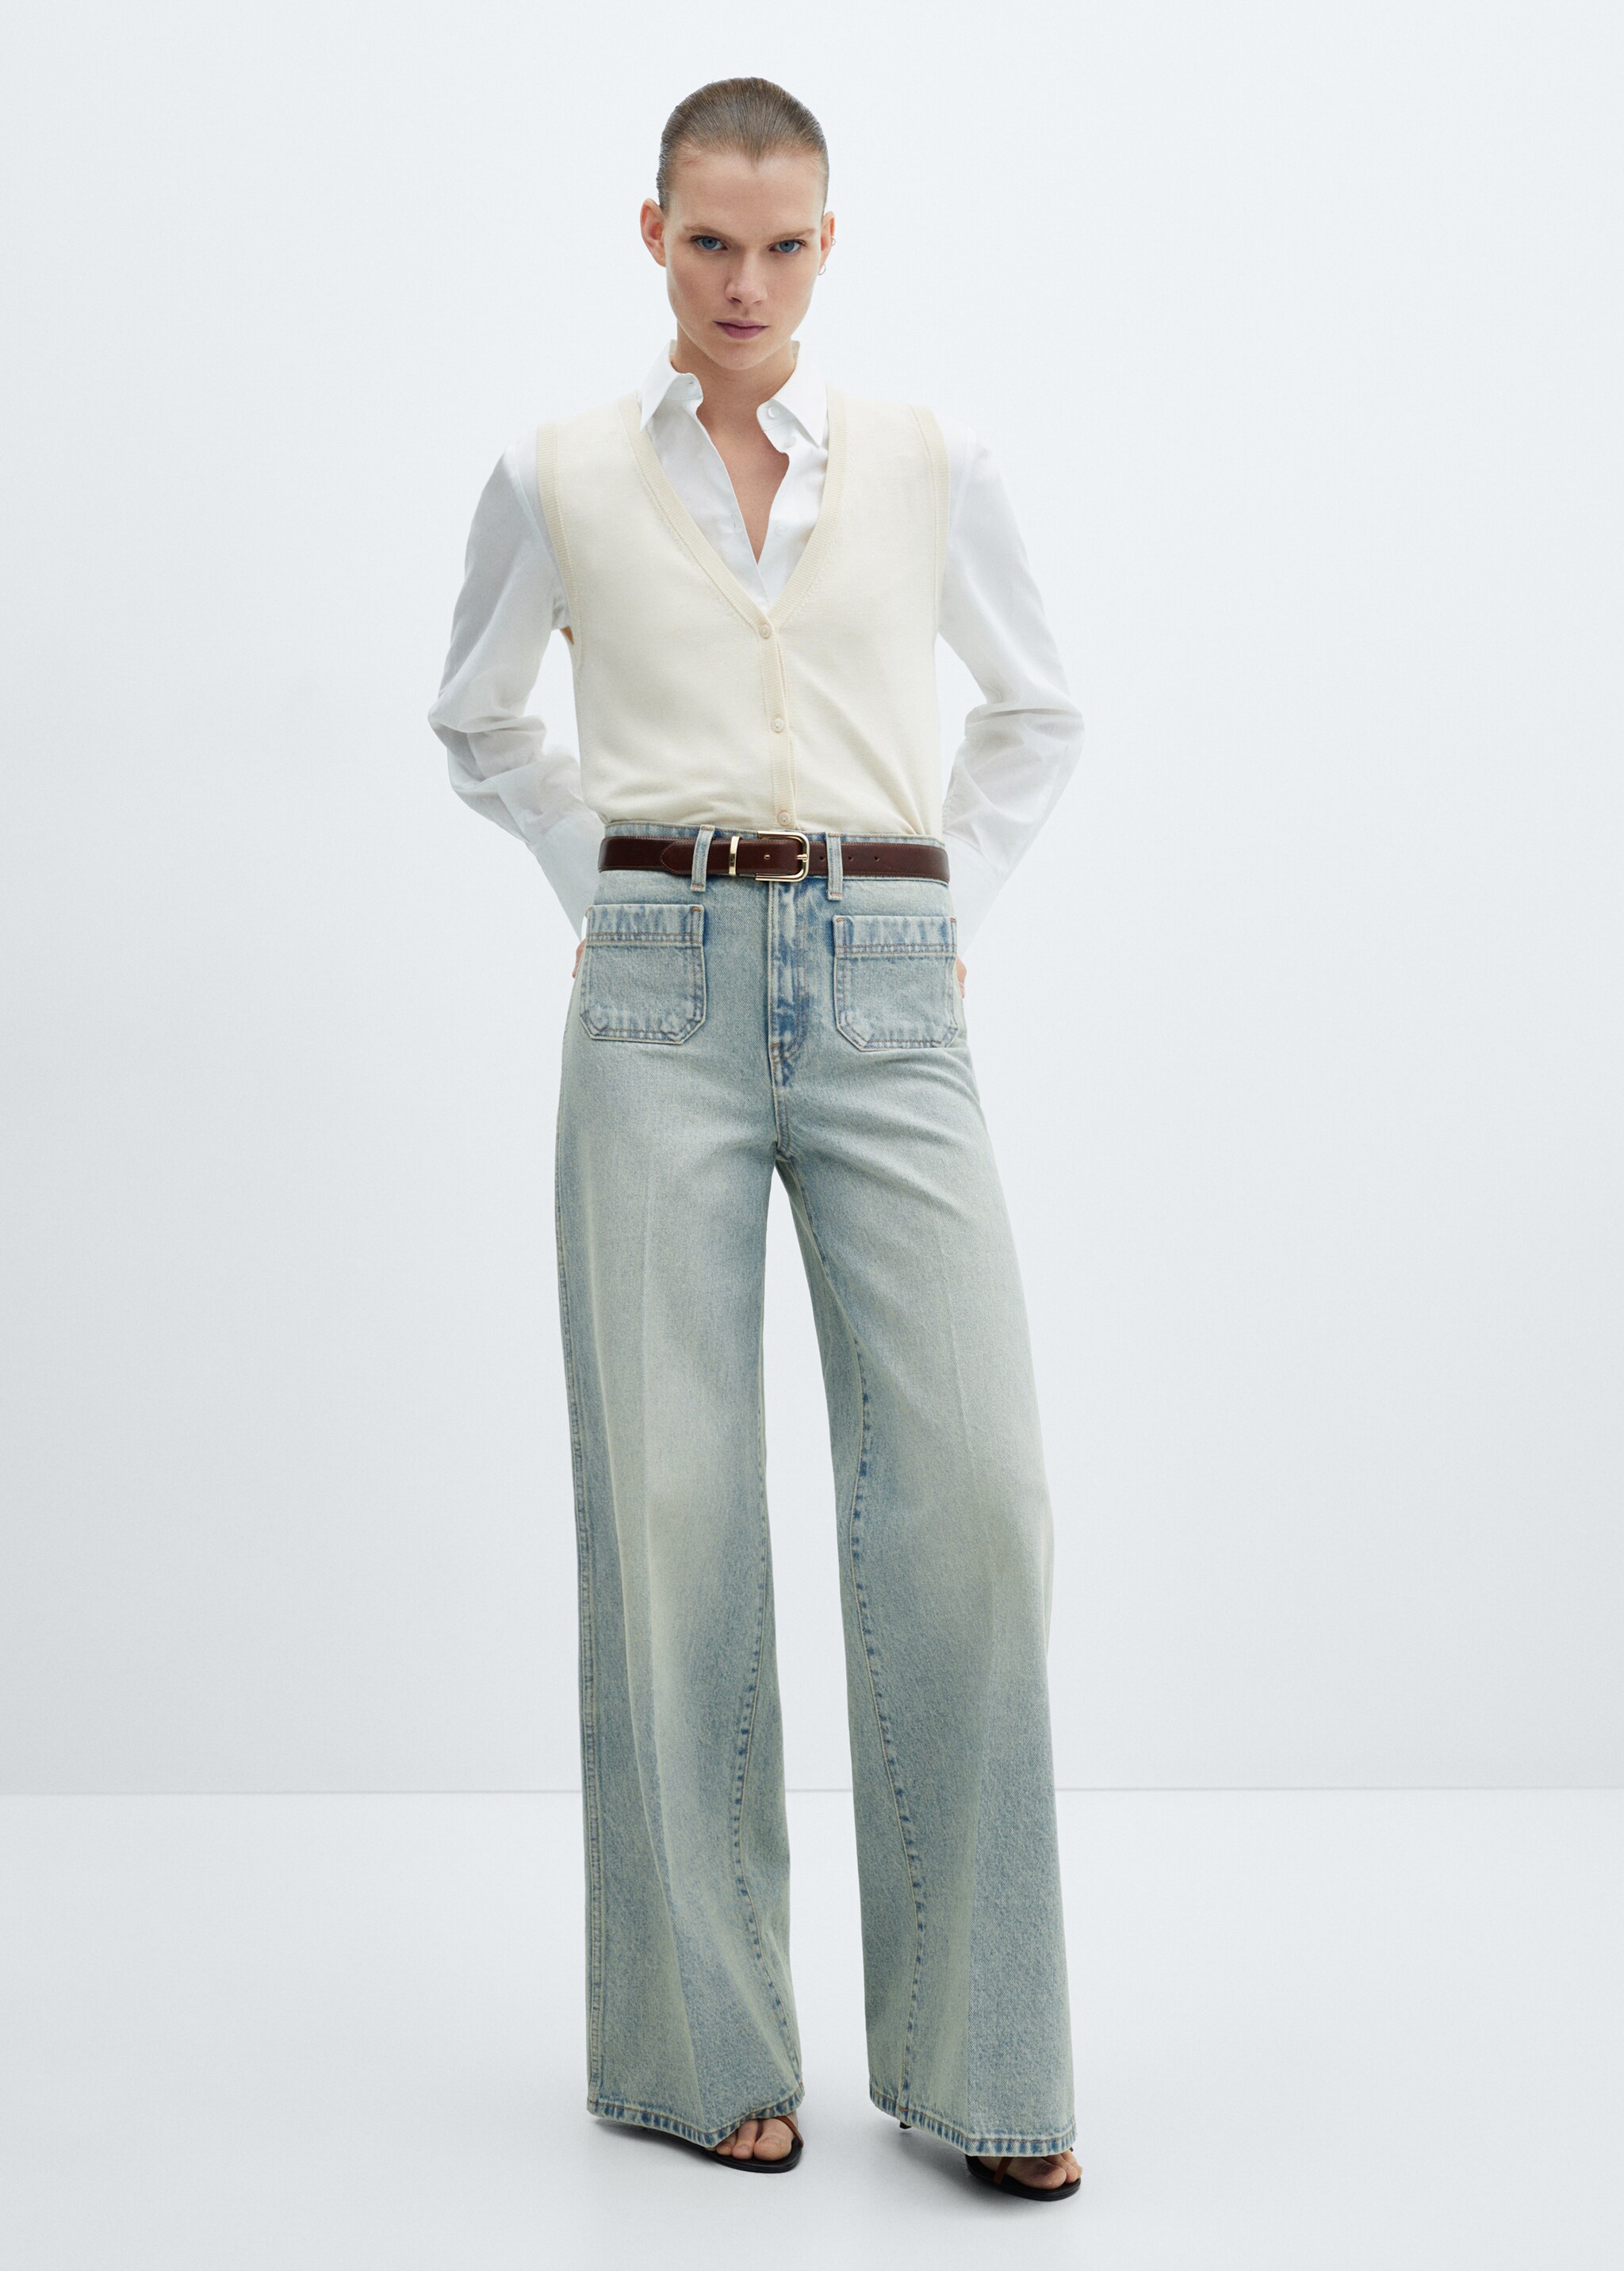 Wideleg jeans with pockets - General plane